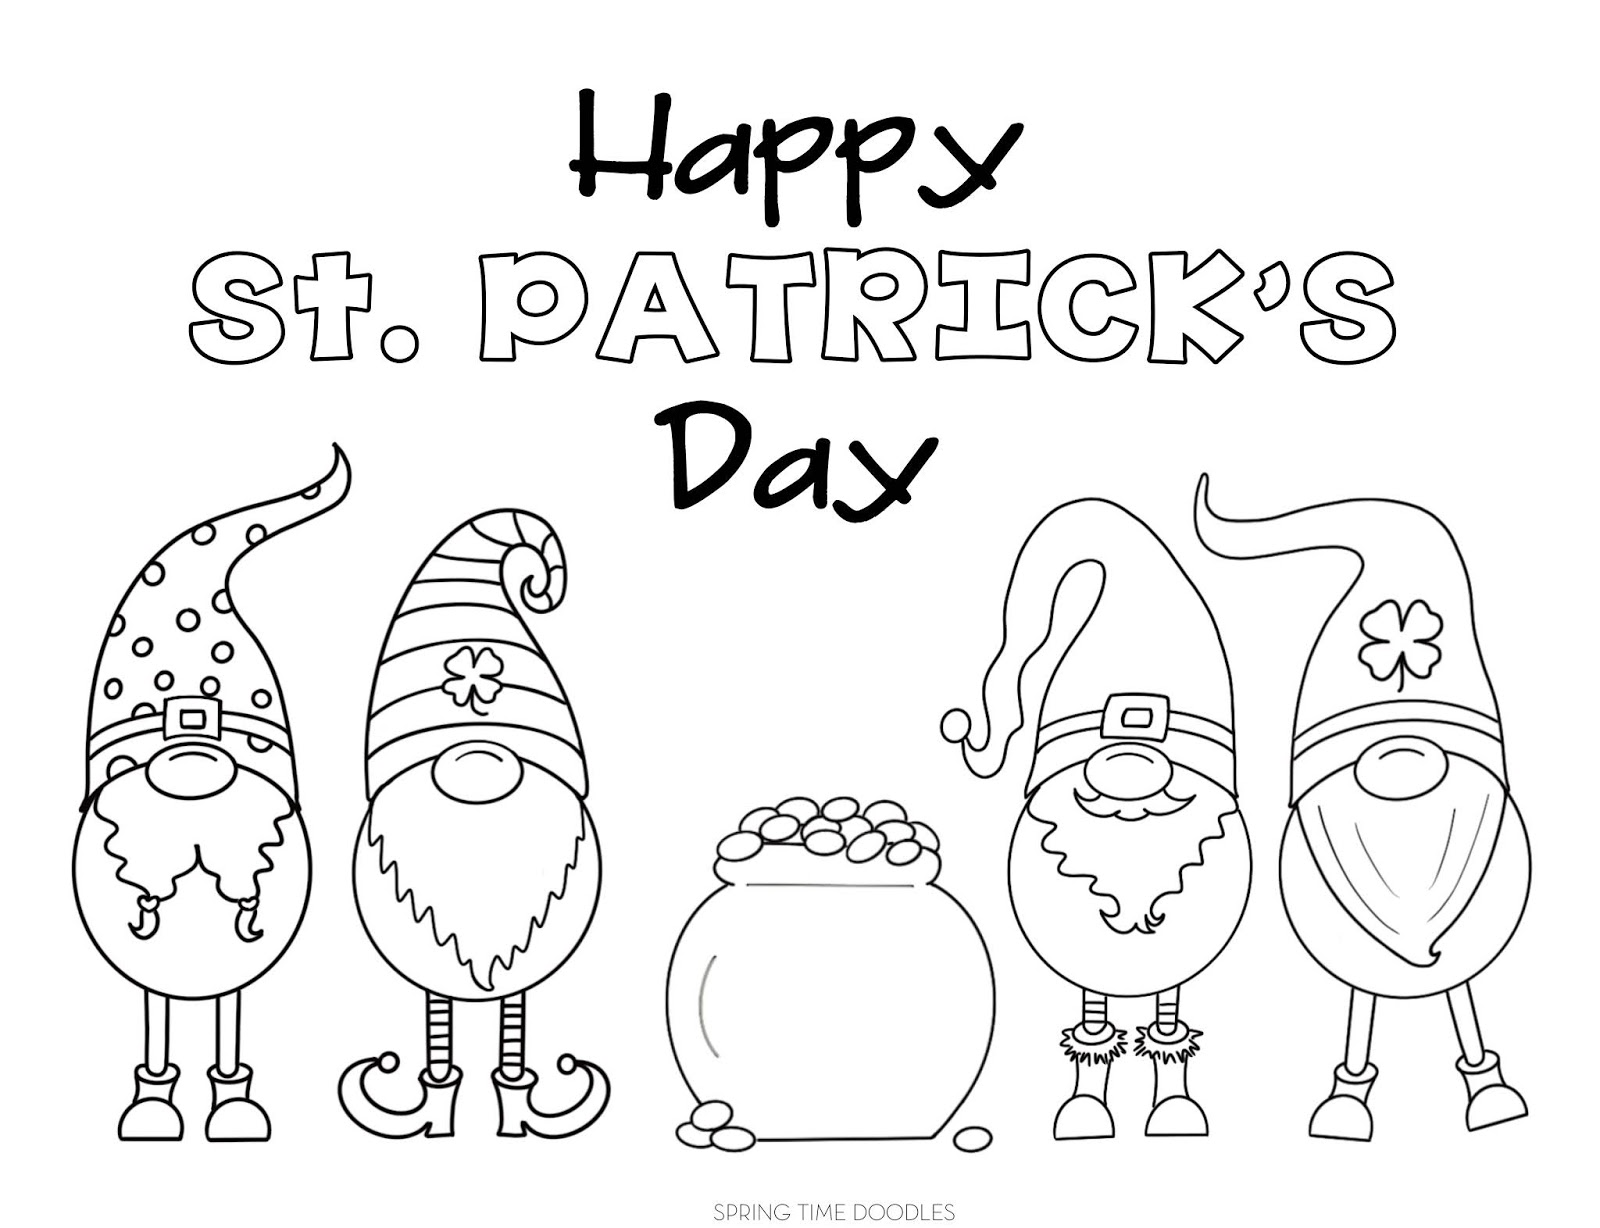 St patricks day free coloring pages spring time doodles